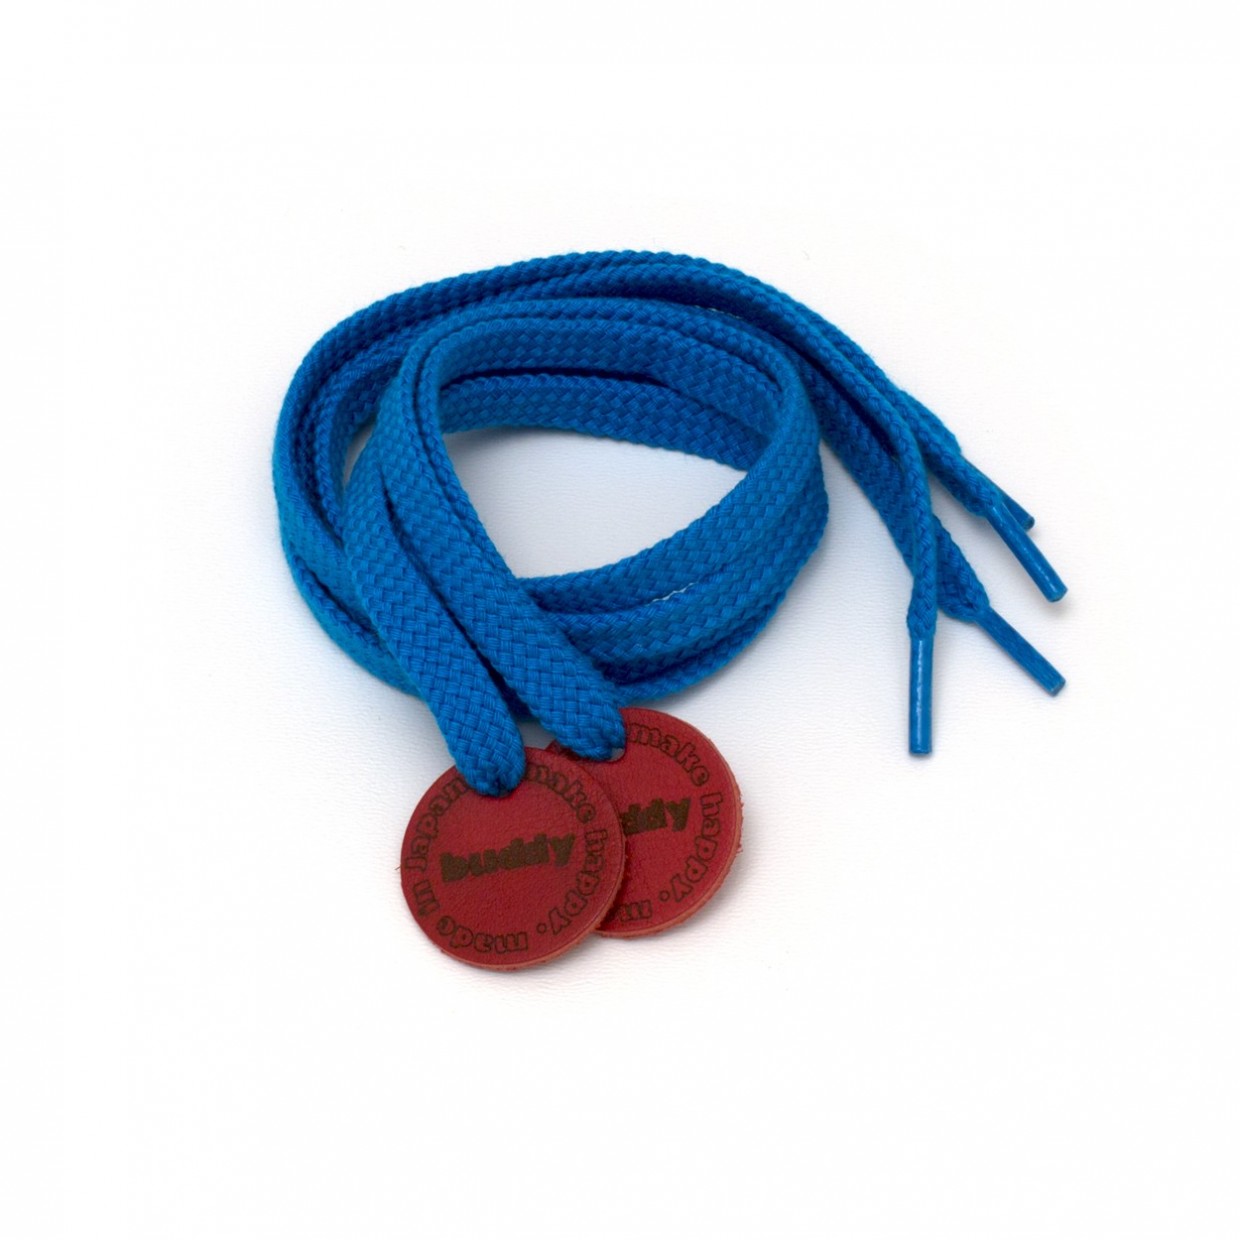 Shoelaces Blue with Leather patch 78 cm : 31 "